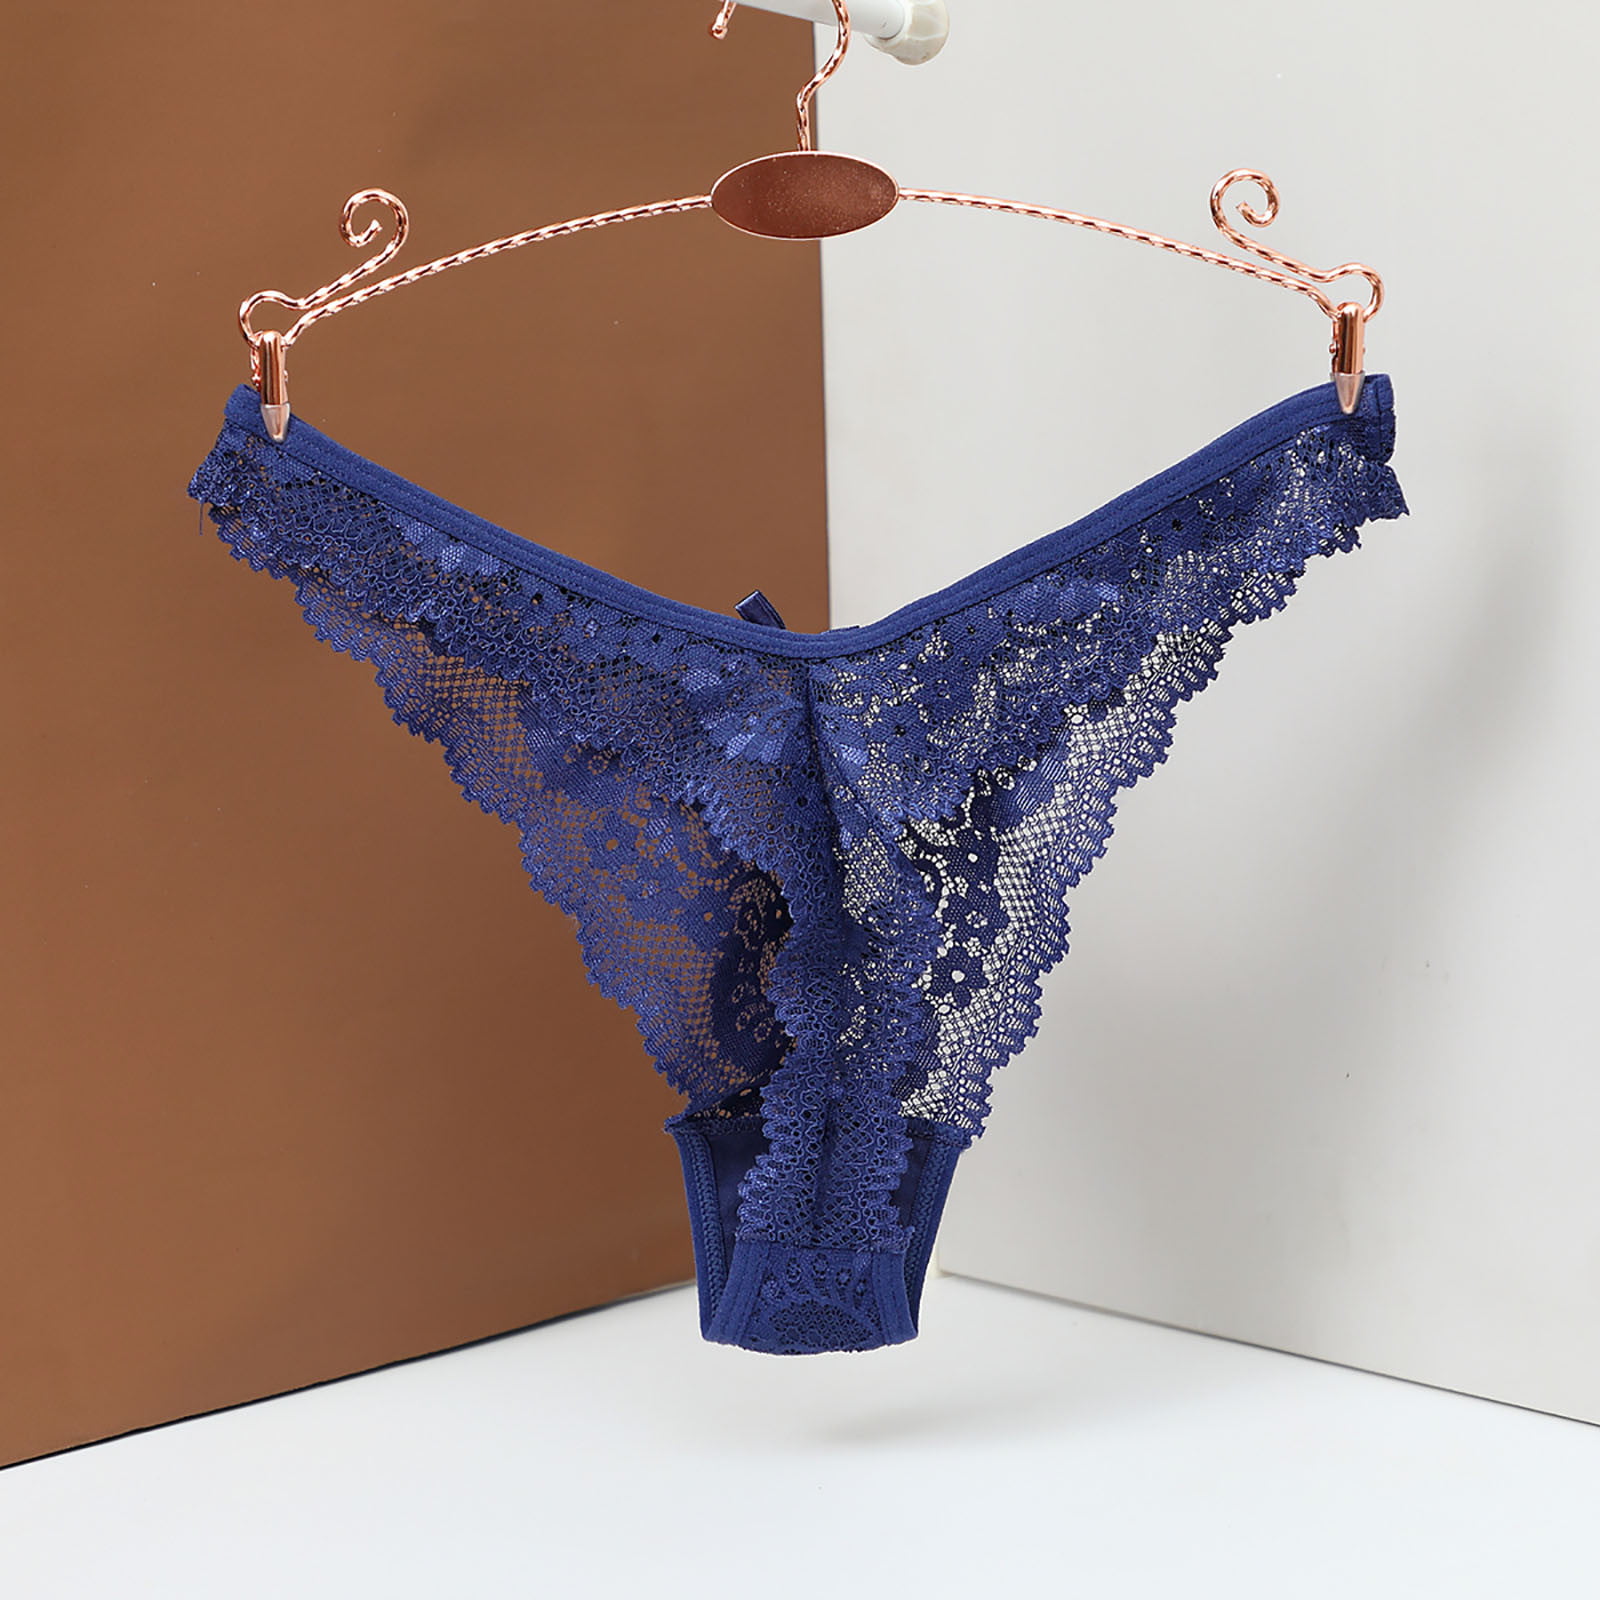 Period Panty Extra Strong Slip Lace in blue, pink shop online